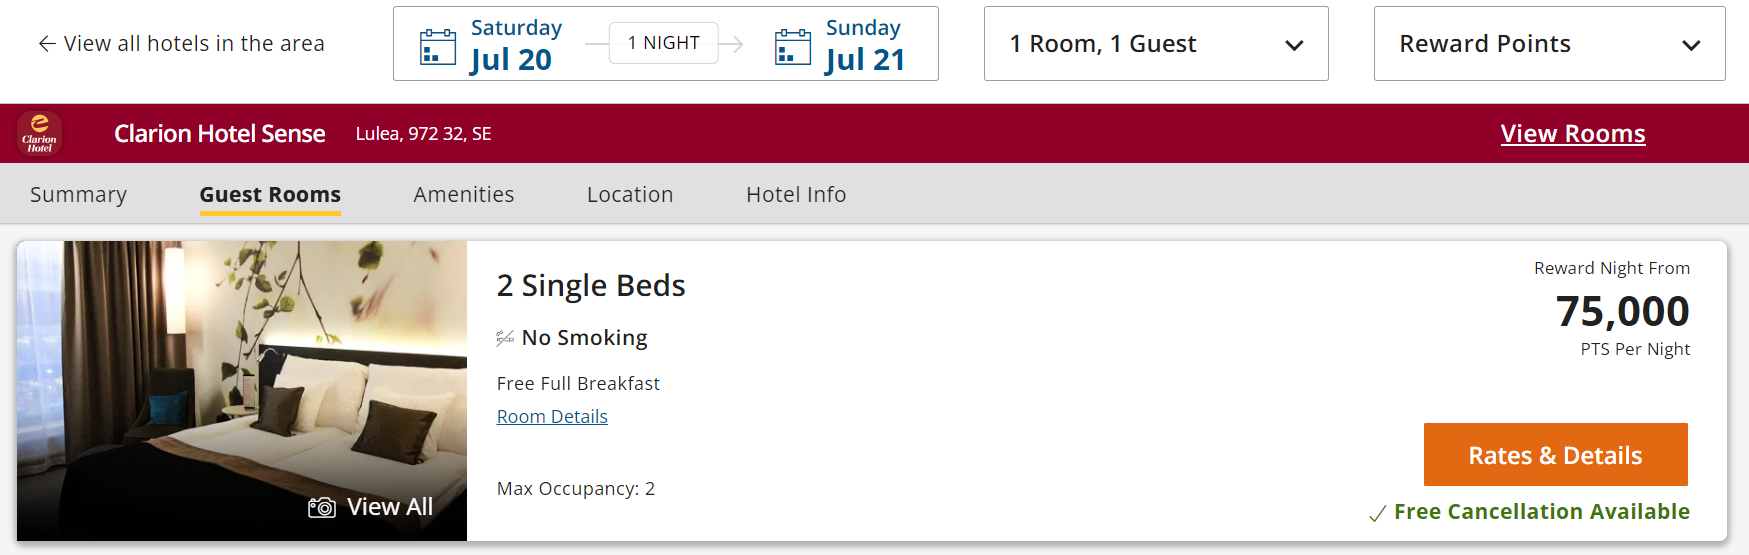 Choice Hotel pricing at 75,000 points